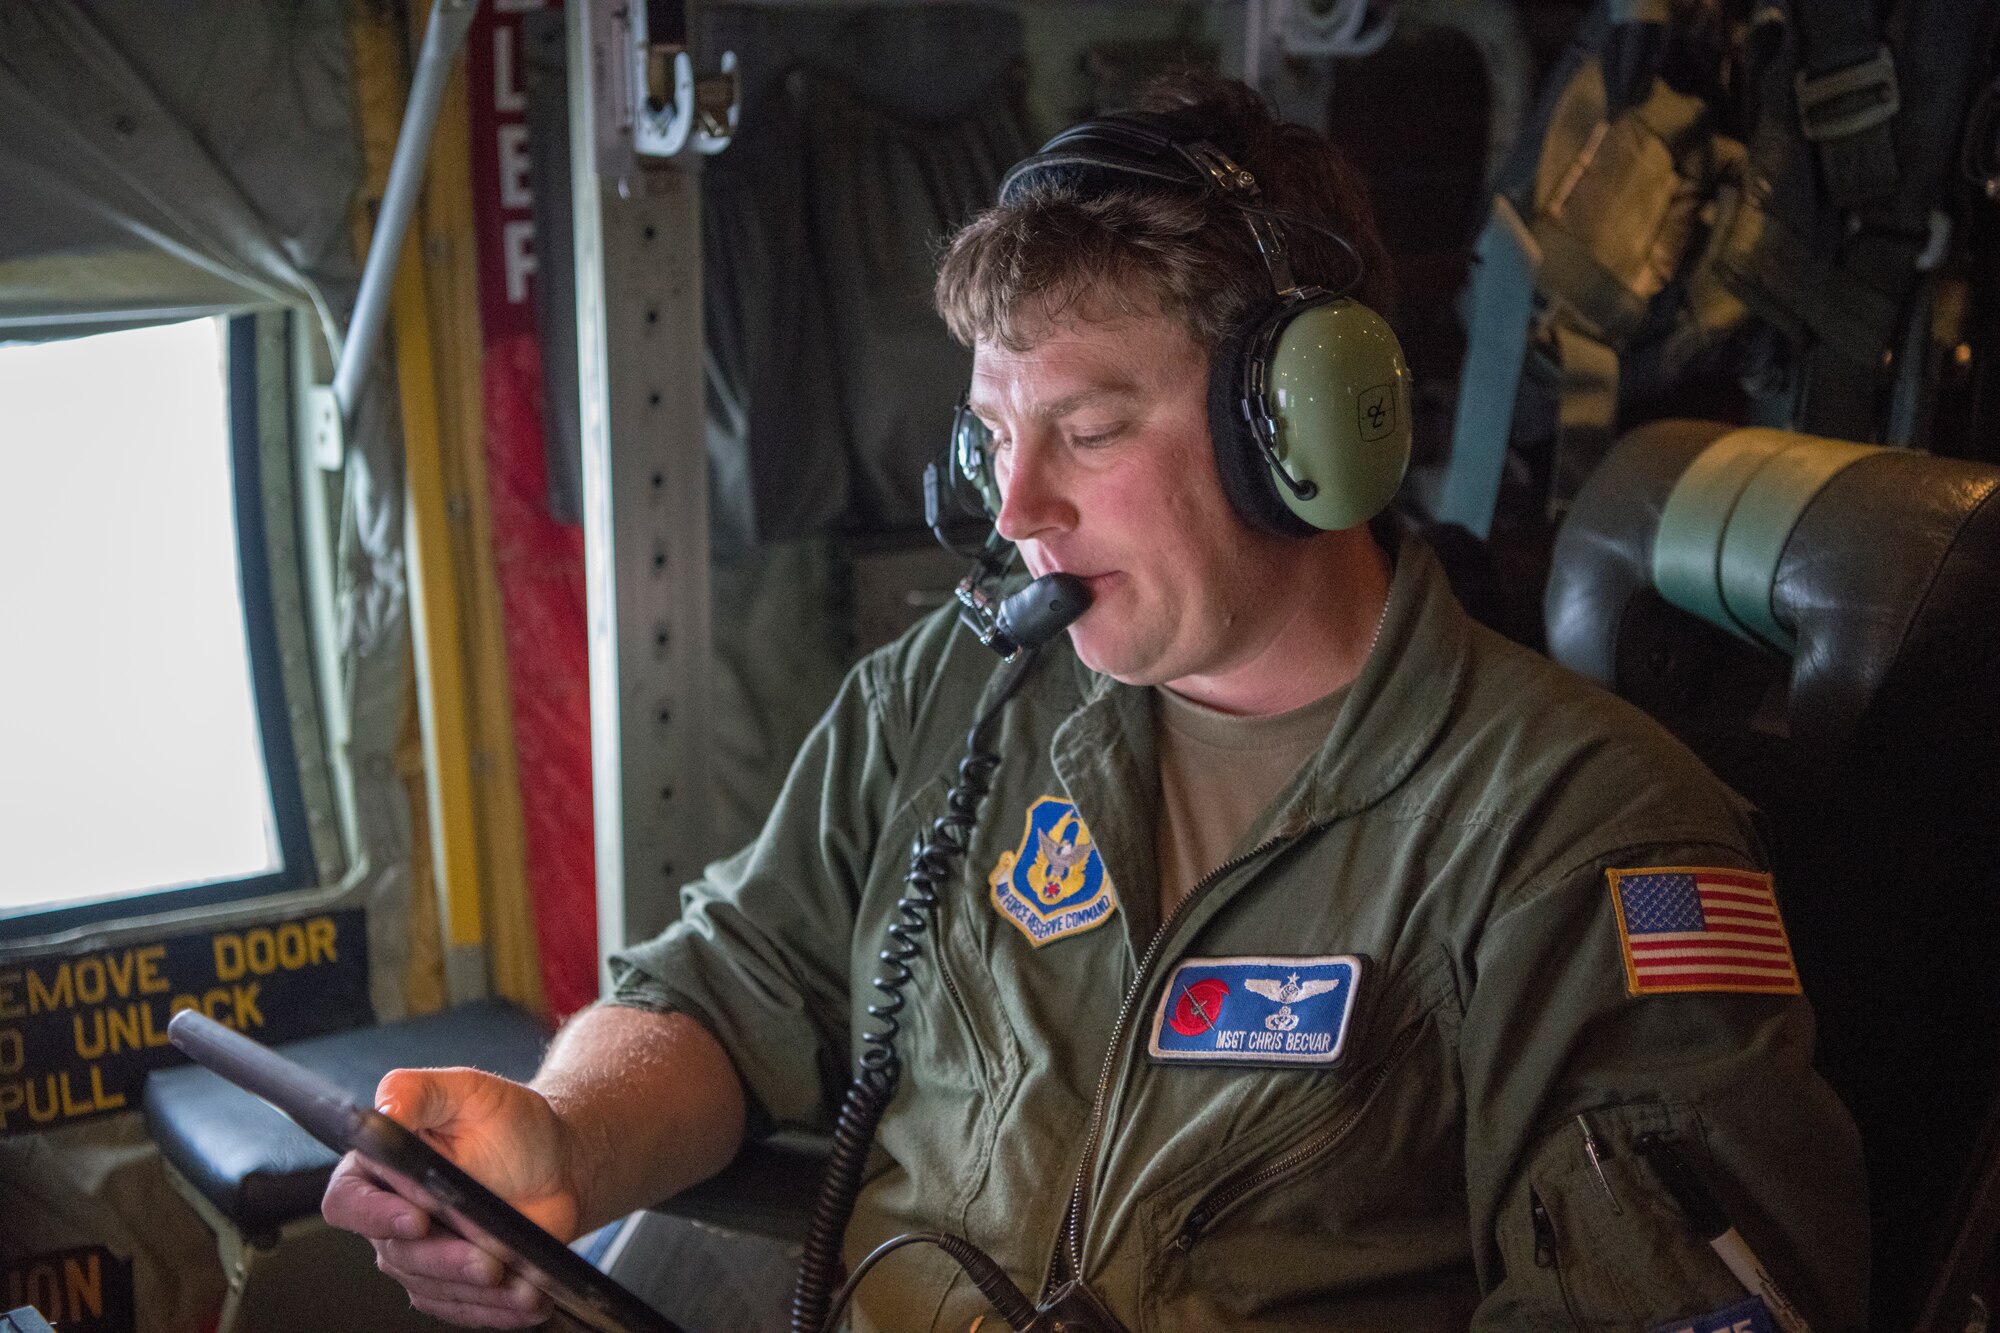 Master Sgt. Chris Becvar, 53rd Weather Reconnaissance Squadron loadmaster, reviews the flight data on his tablet June 5, 2020 over the Gulf of Mexico. The Hurricane Hunters were tasked to fly a fixed mission to locate the center of Tropical Storm Cristobal and the data gathered was sent to the National Hurricane Center for their weather model forecasts. (U.S. Air Force Photo by Tech. Sgt. Christopher Carranza)